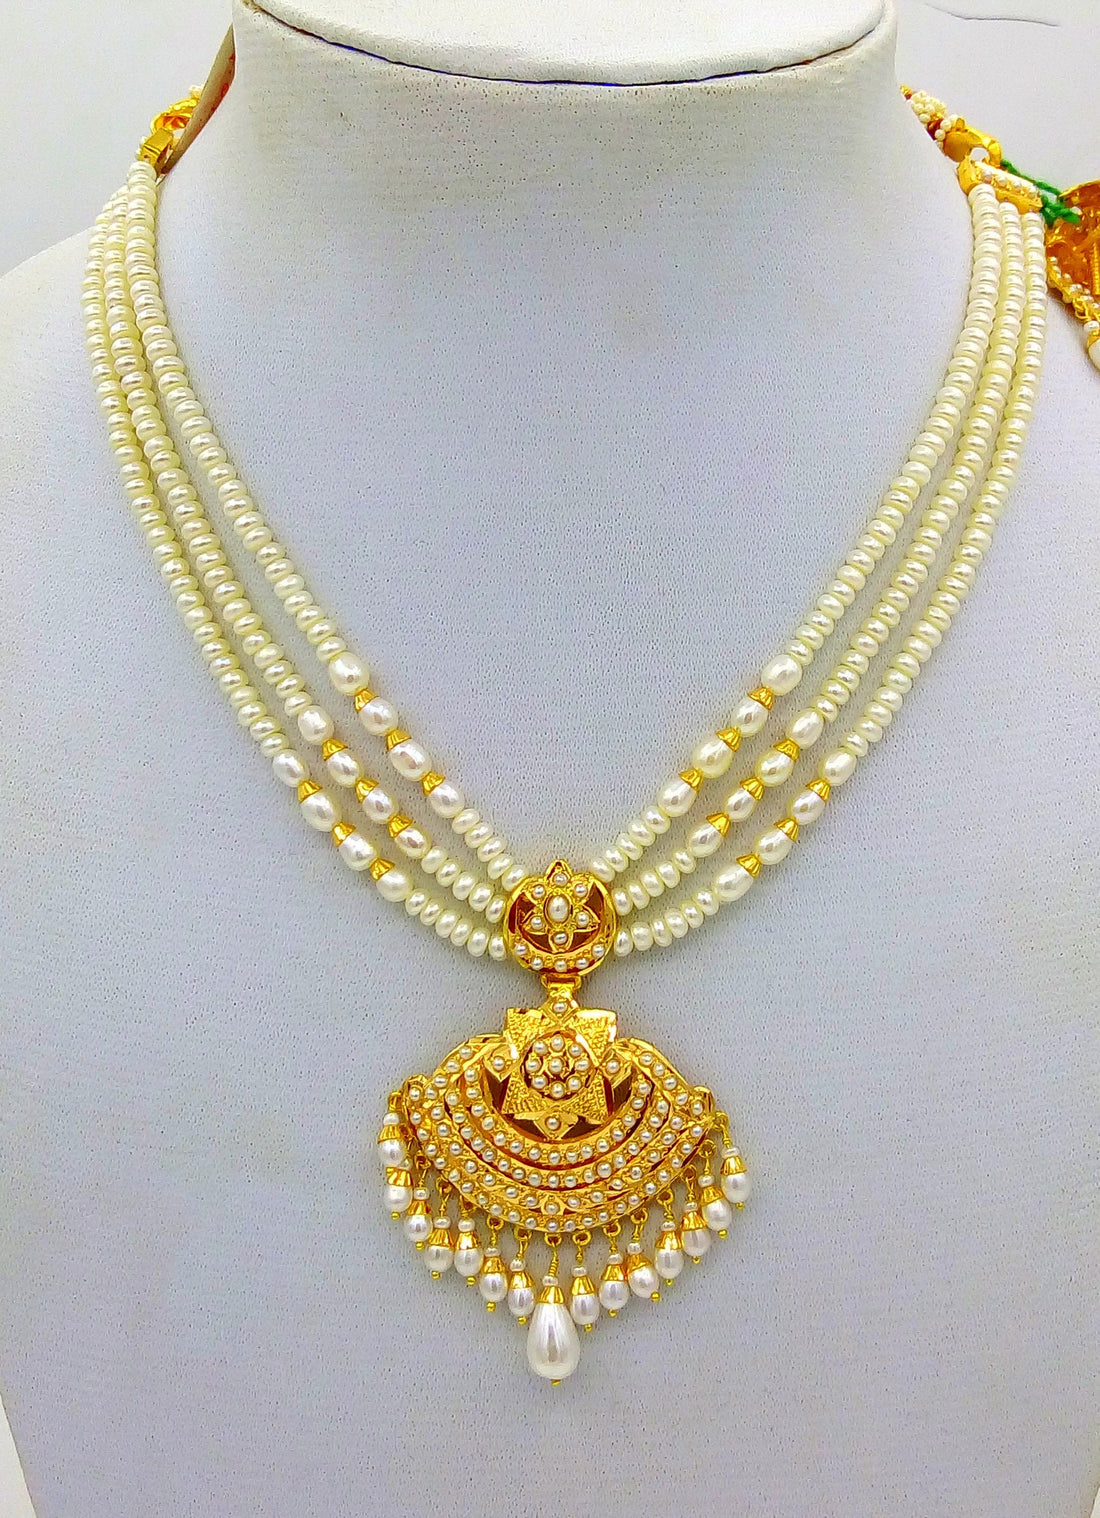 222kt yellow gold handmade gorgeous pearl necklace excellent wedding bridal necklace unisex tribal punjabi muslim jewelry set08 - TRIBAL ORNAMENTS